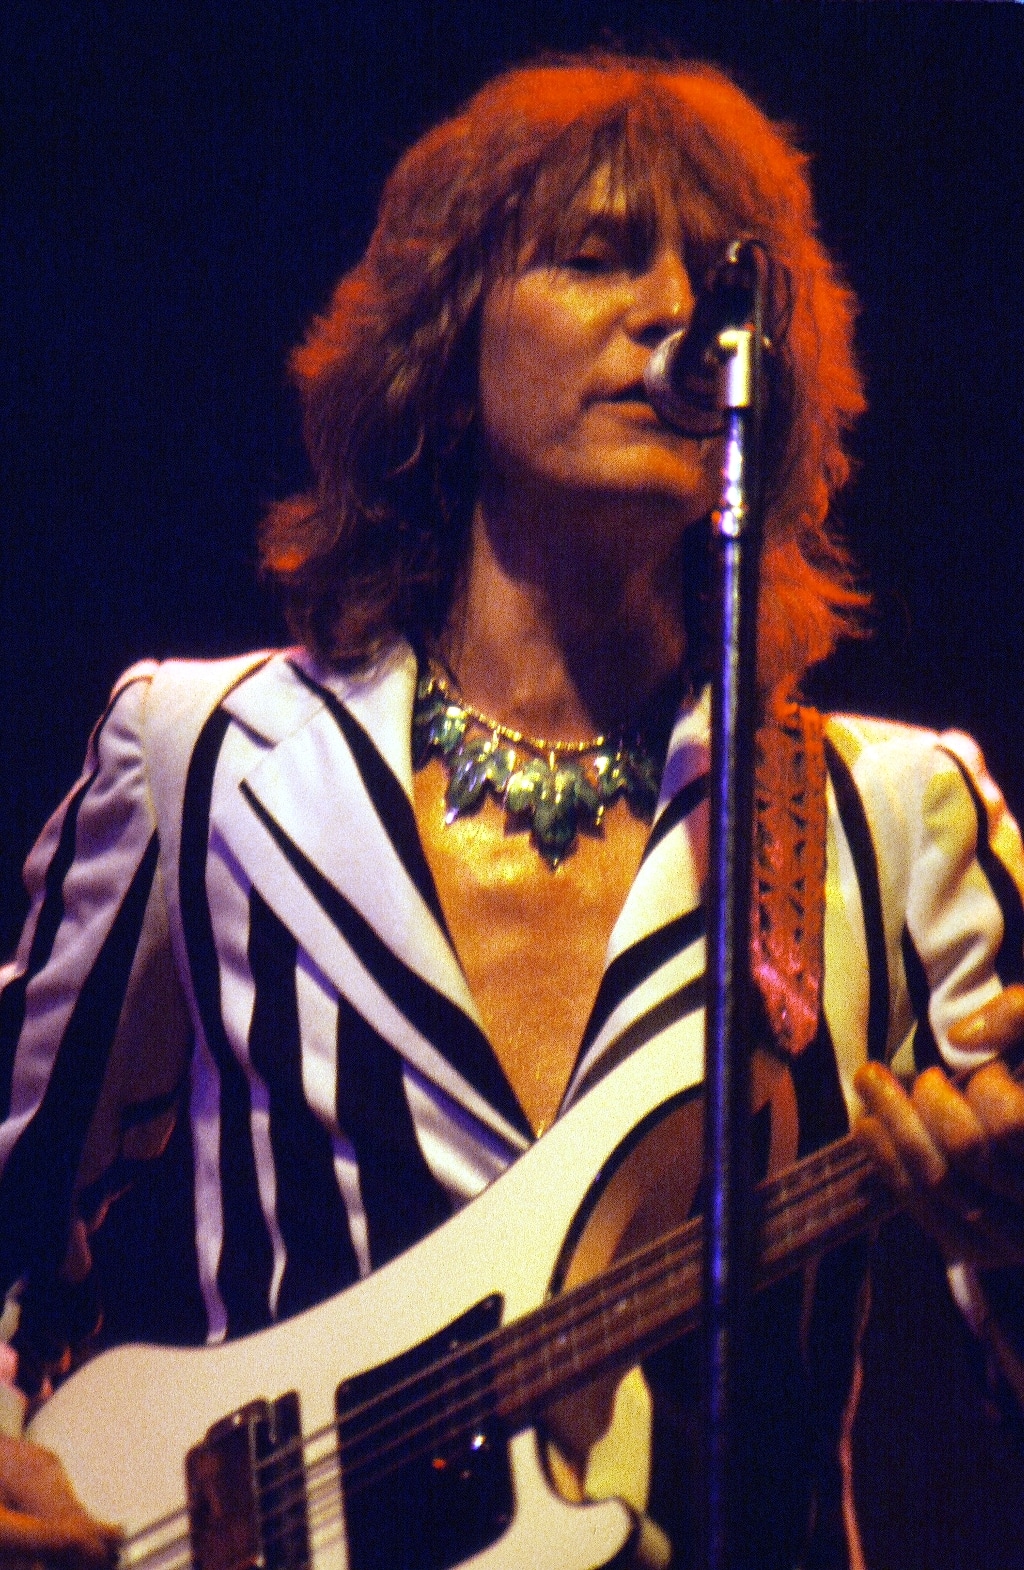 Yes Chris Squire